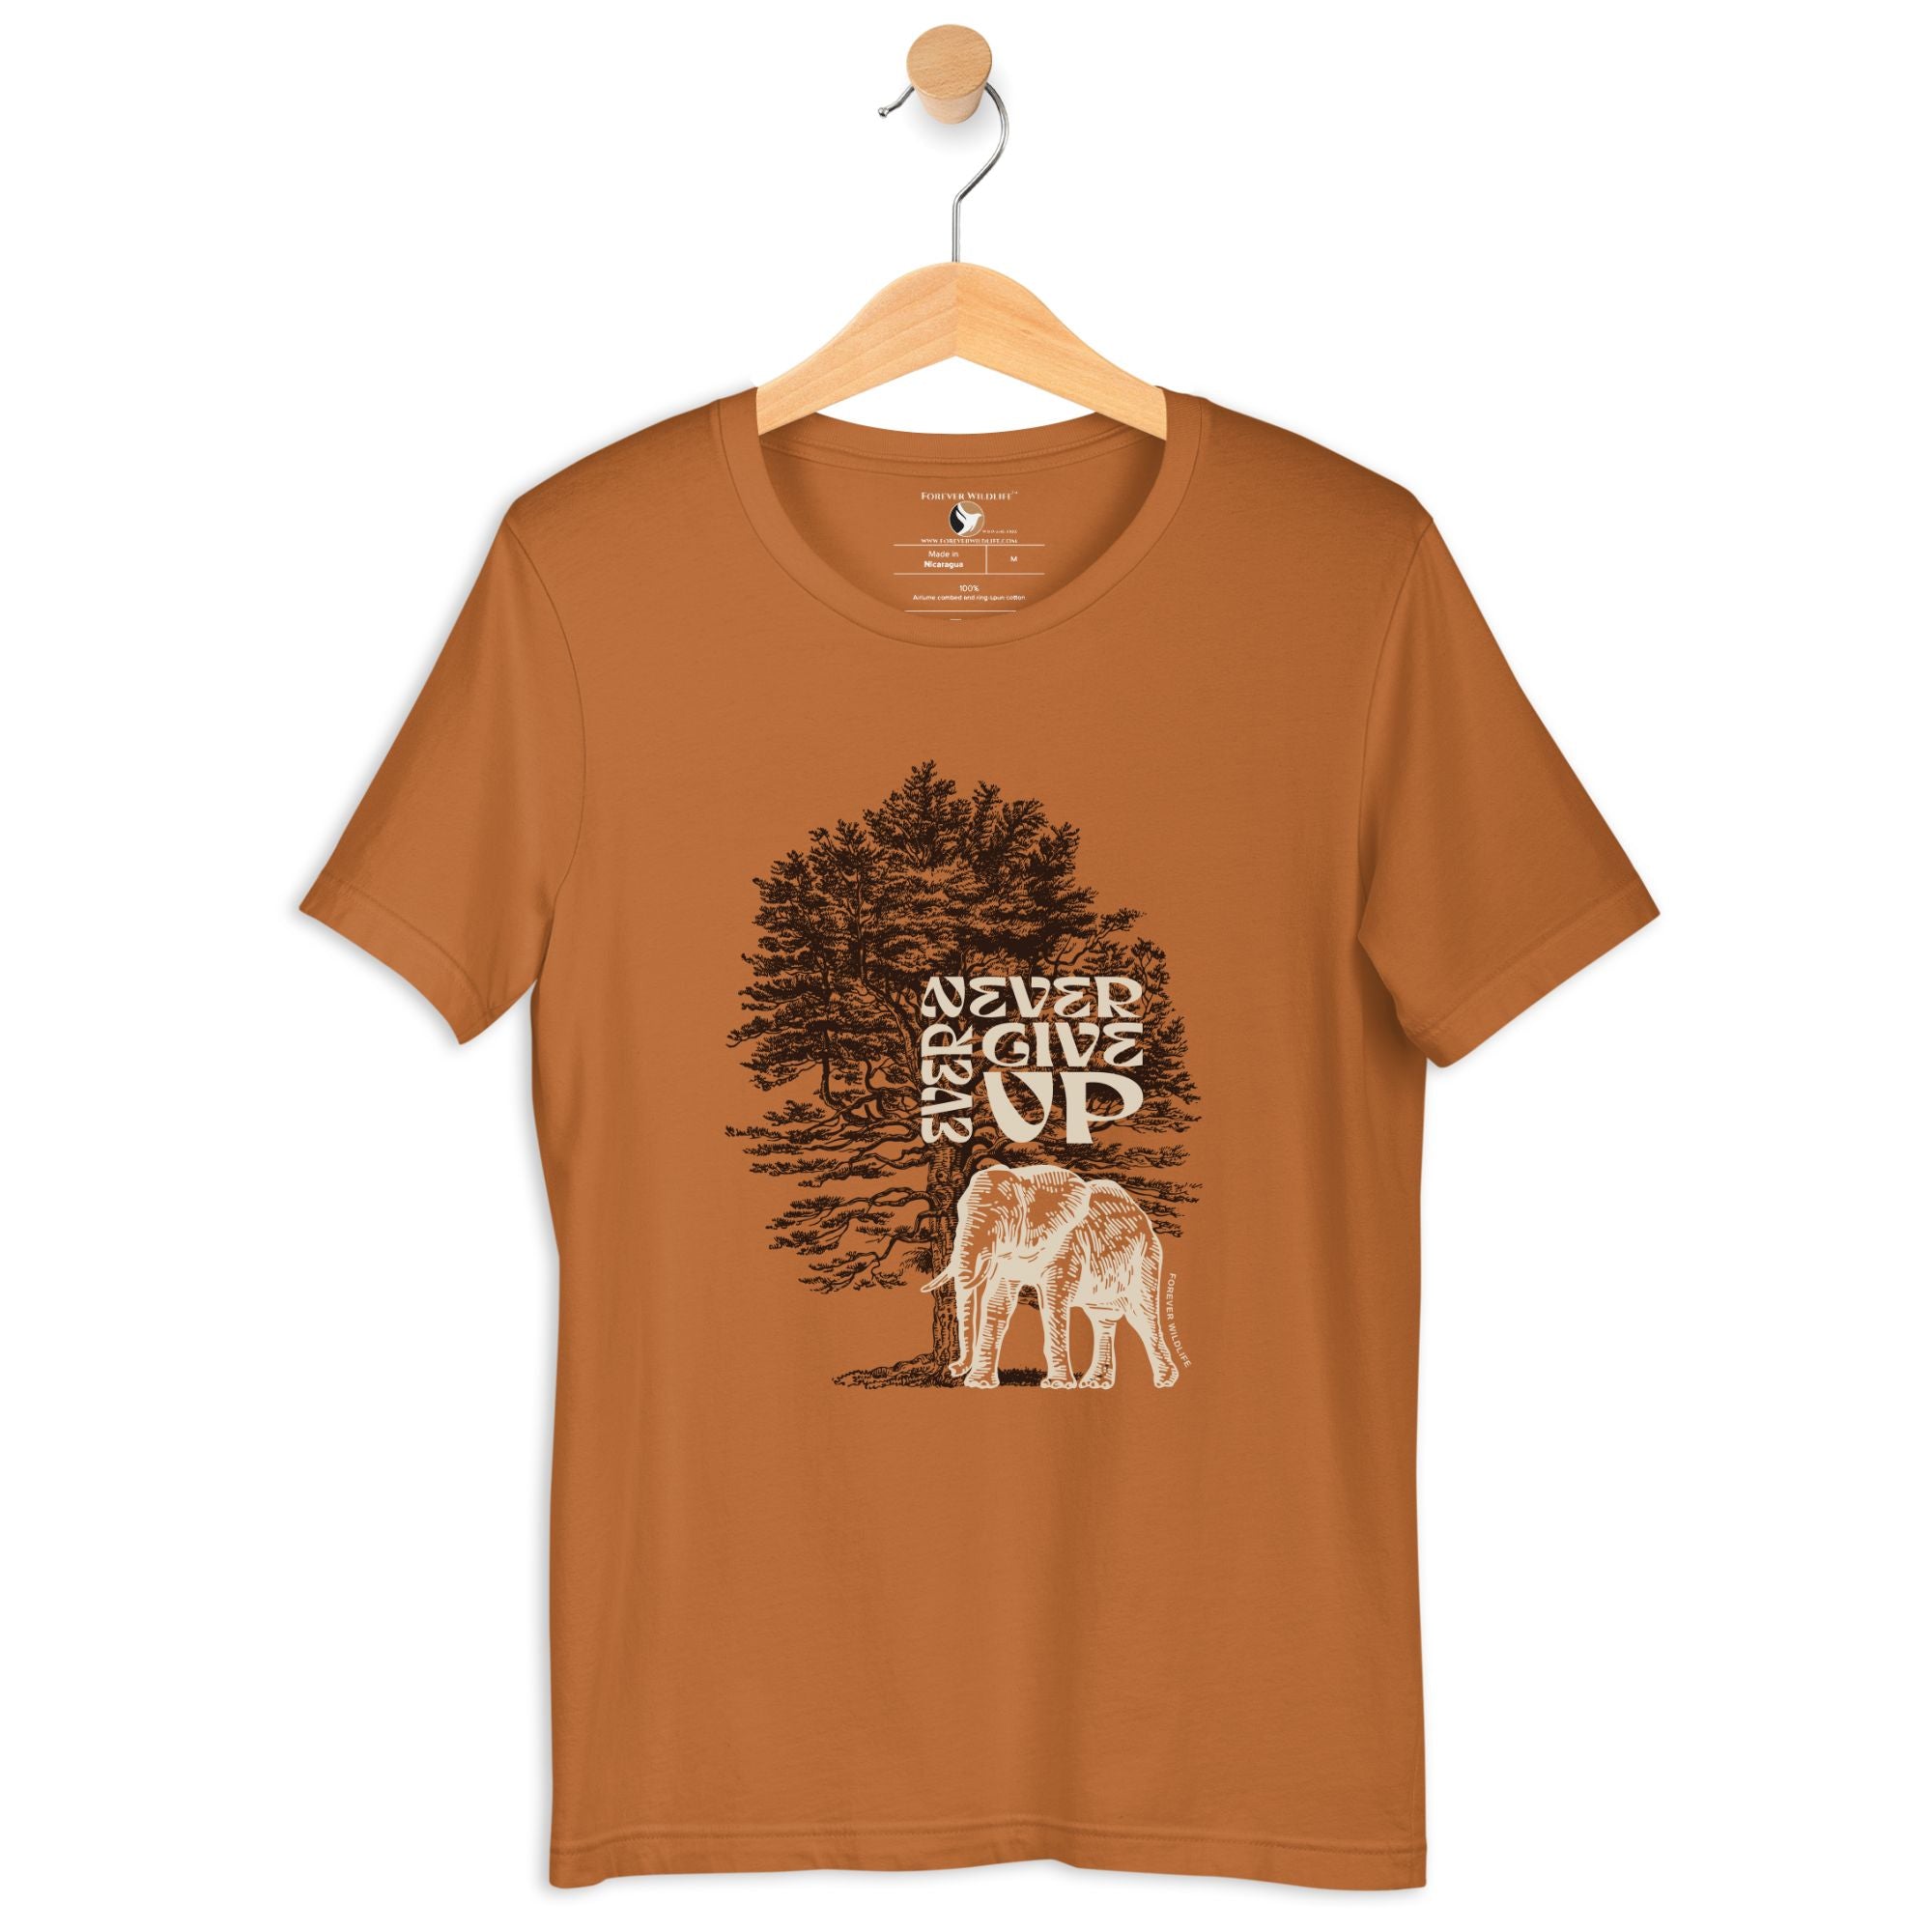 Elephant T-Shirt in Toast – Premium Wildlife T-Shirt Design with Never Ever Give Up text, Elephant Shirts & Wildlife Clothing